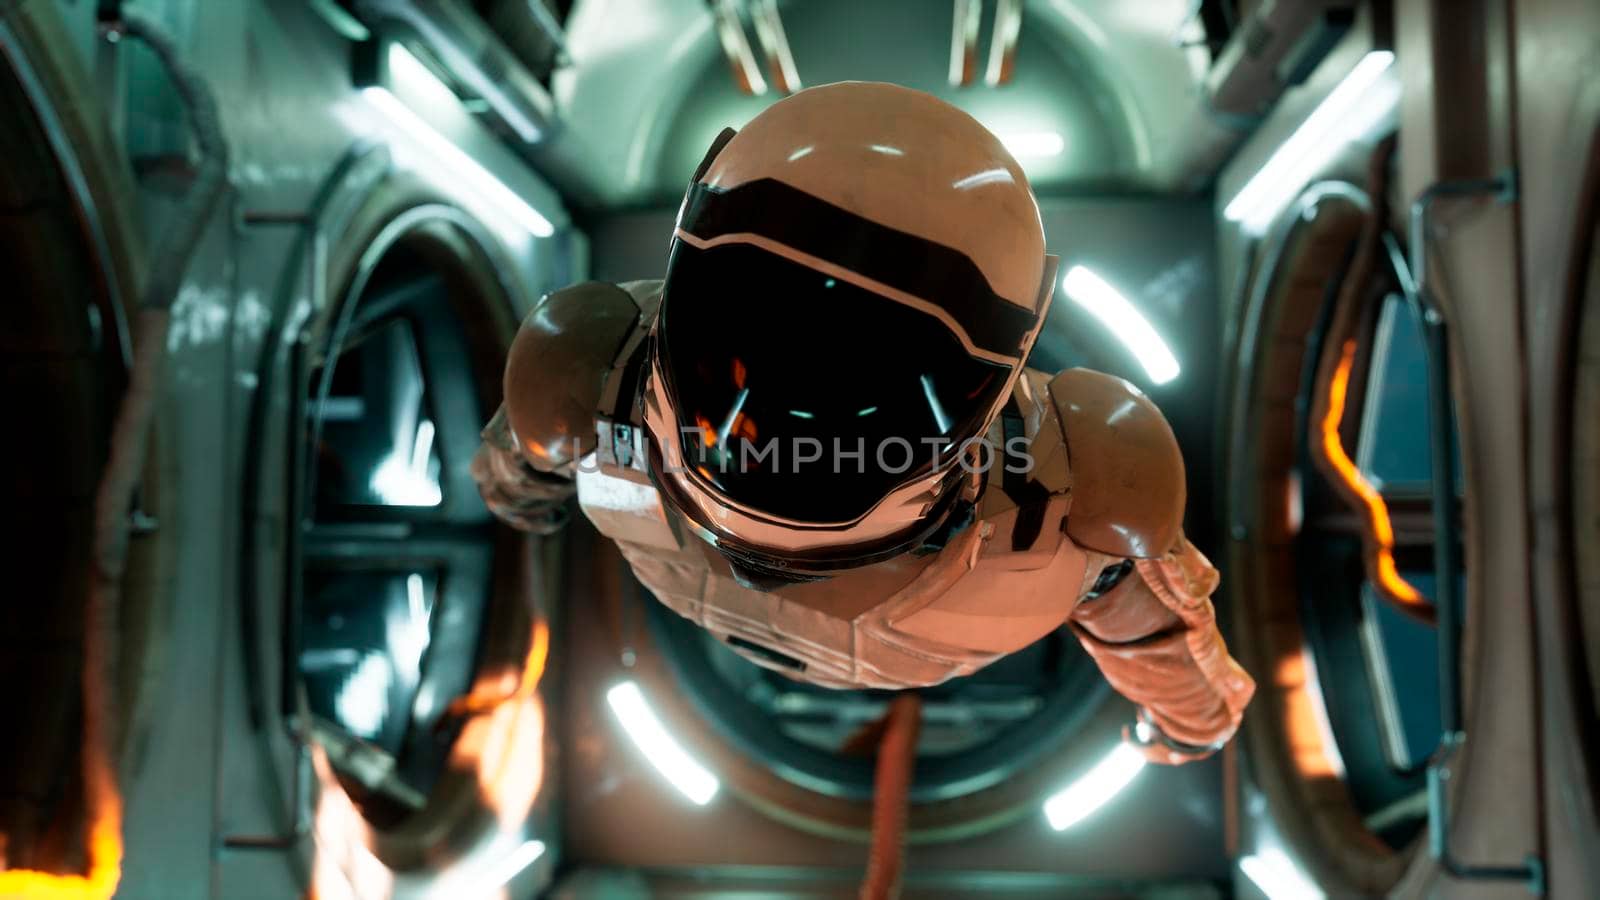 Somewhere in distant space, an astronaut hovers inside his spaceship. 3D Rendering. by designprojects